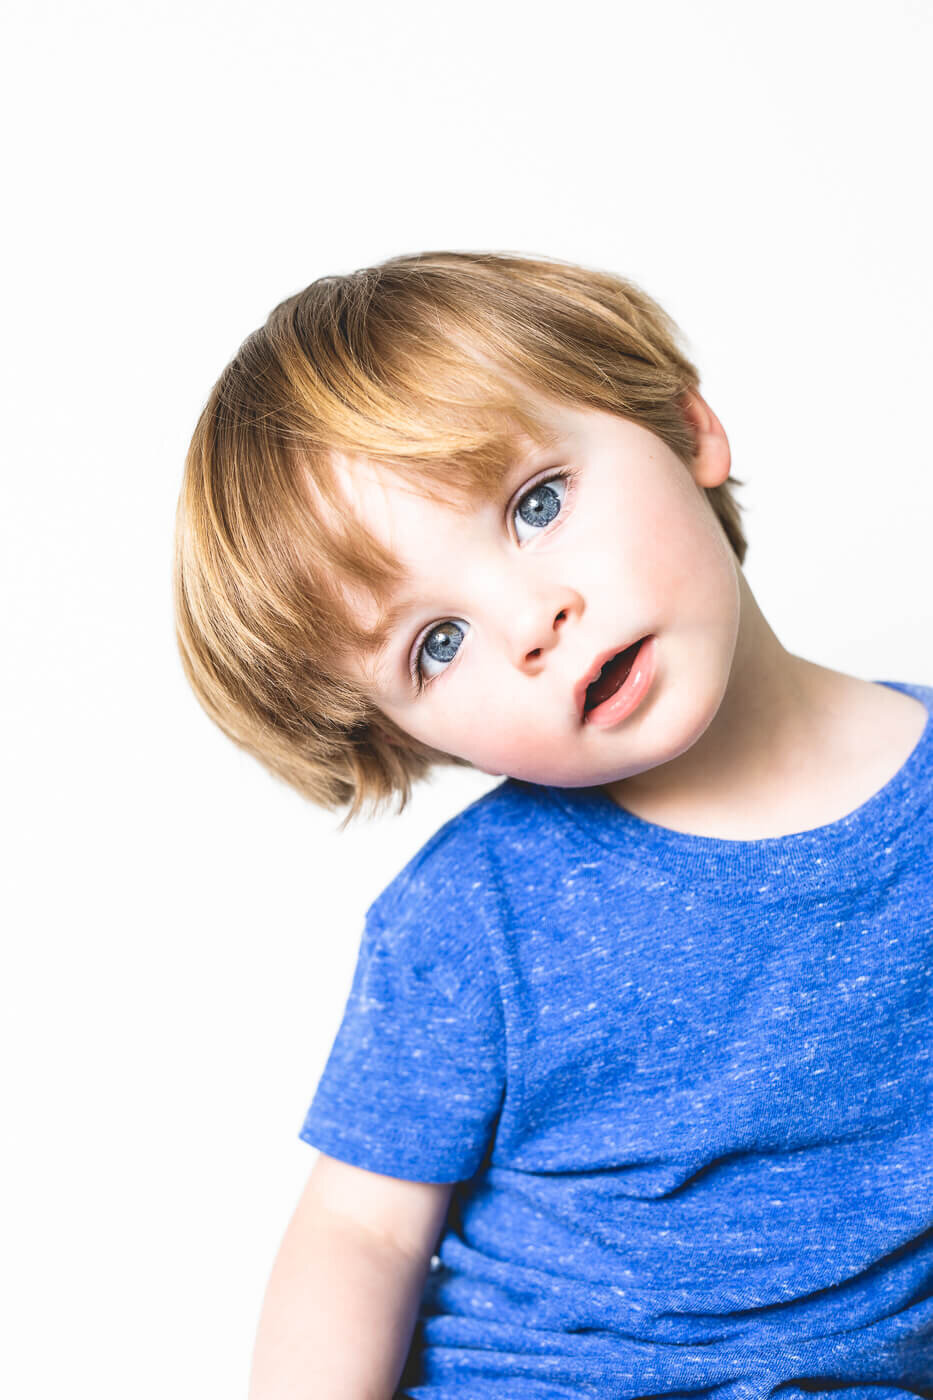 Young boy in bright blue shirt tilting his head in confusion